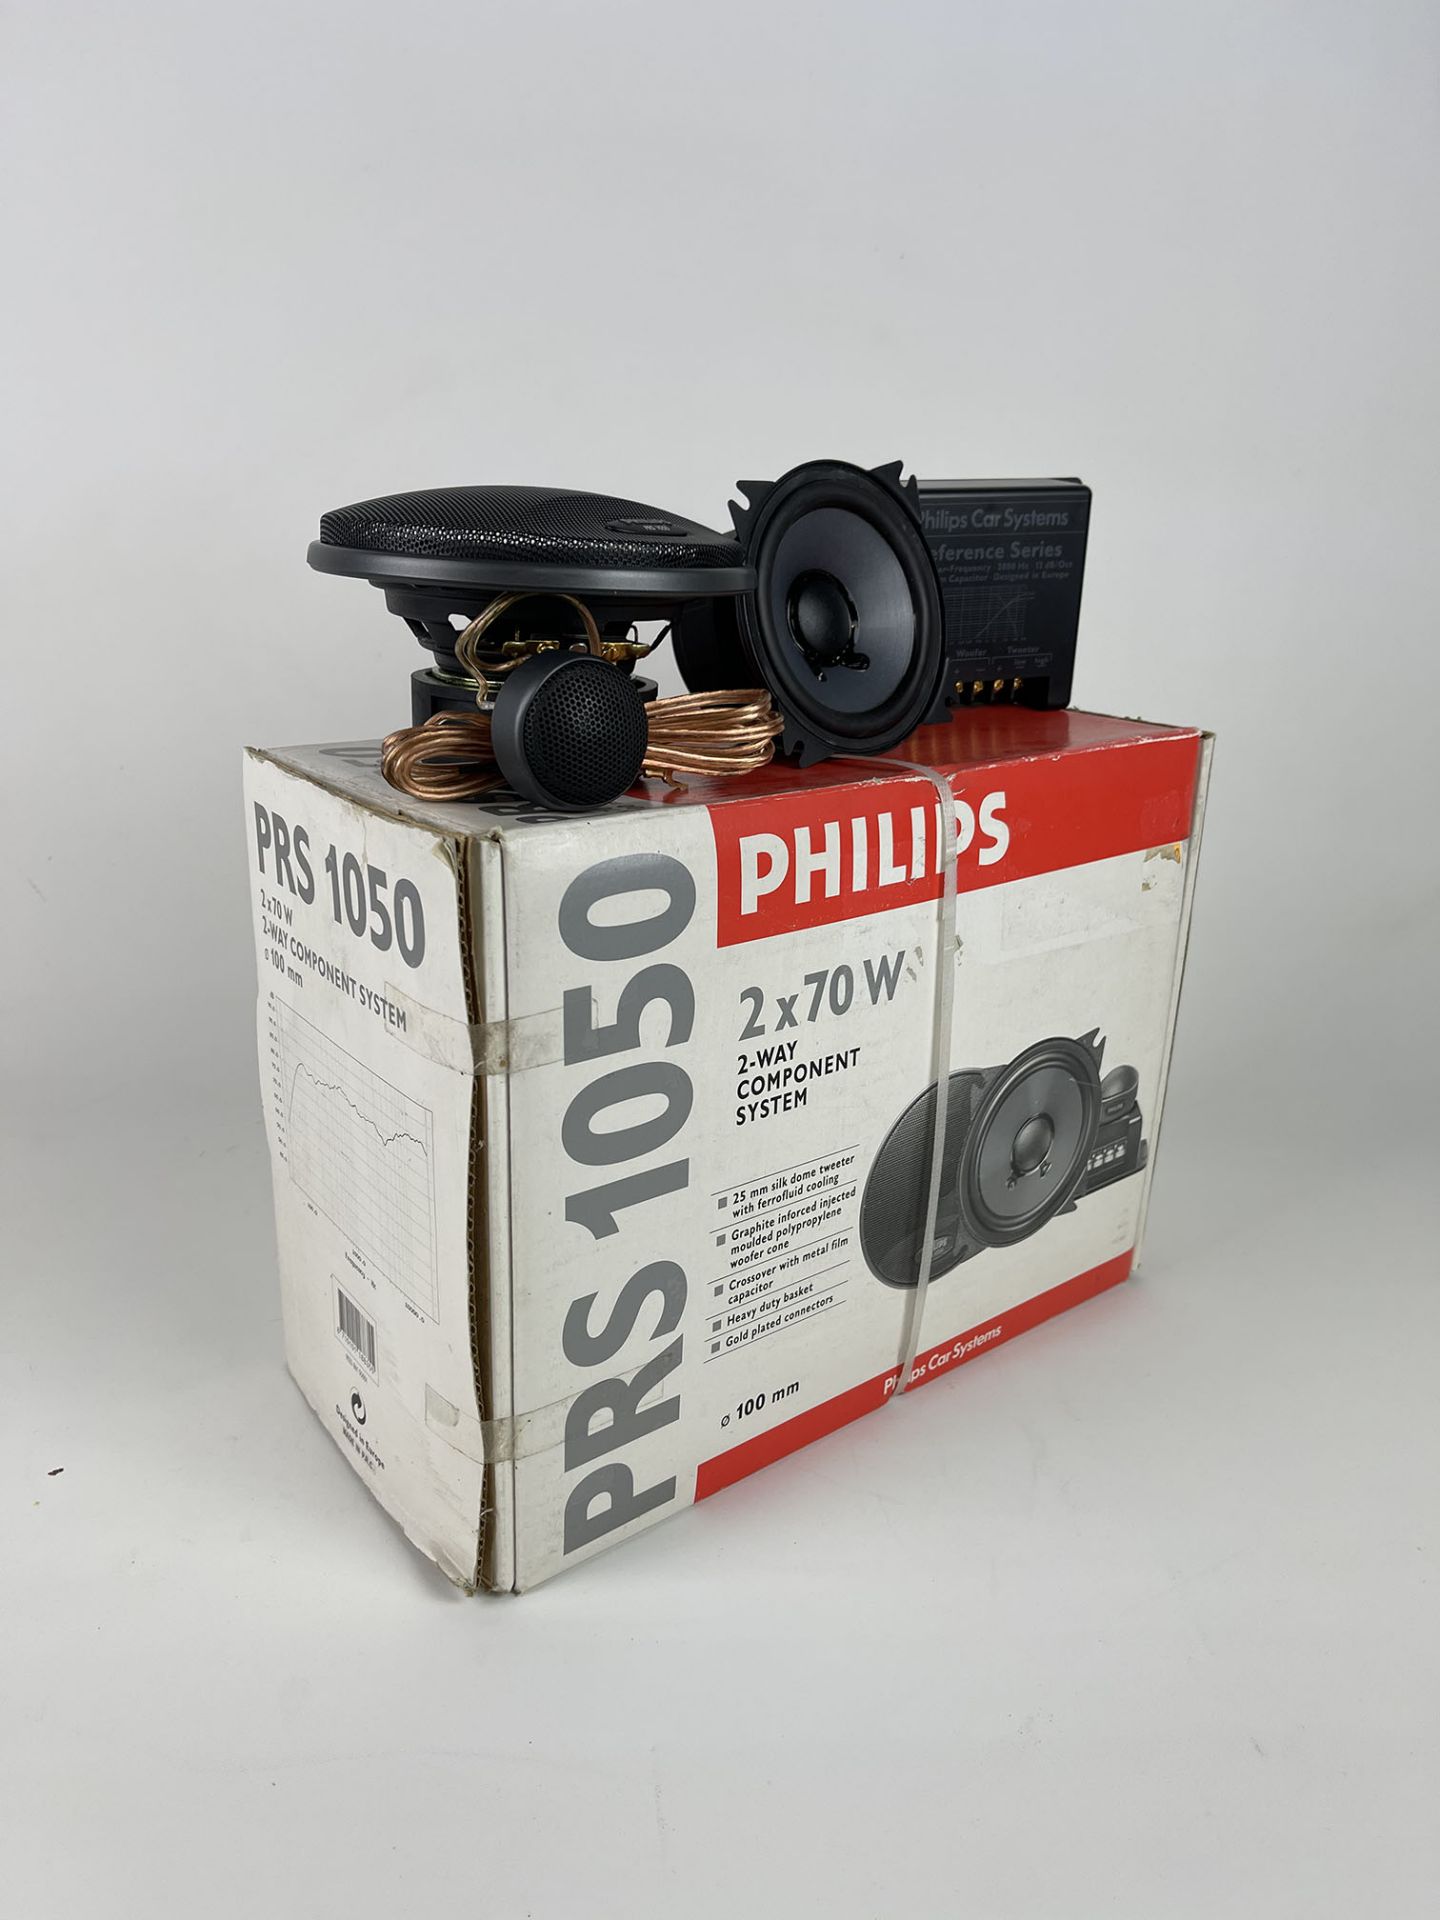 New Old Stock Philips PRS 1050 70W Car Speakers - Image 2 of 3